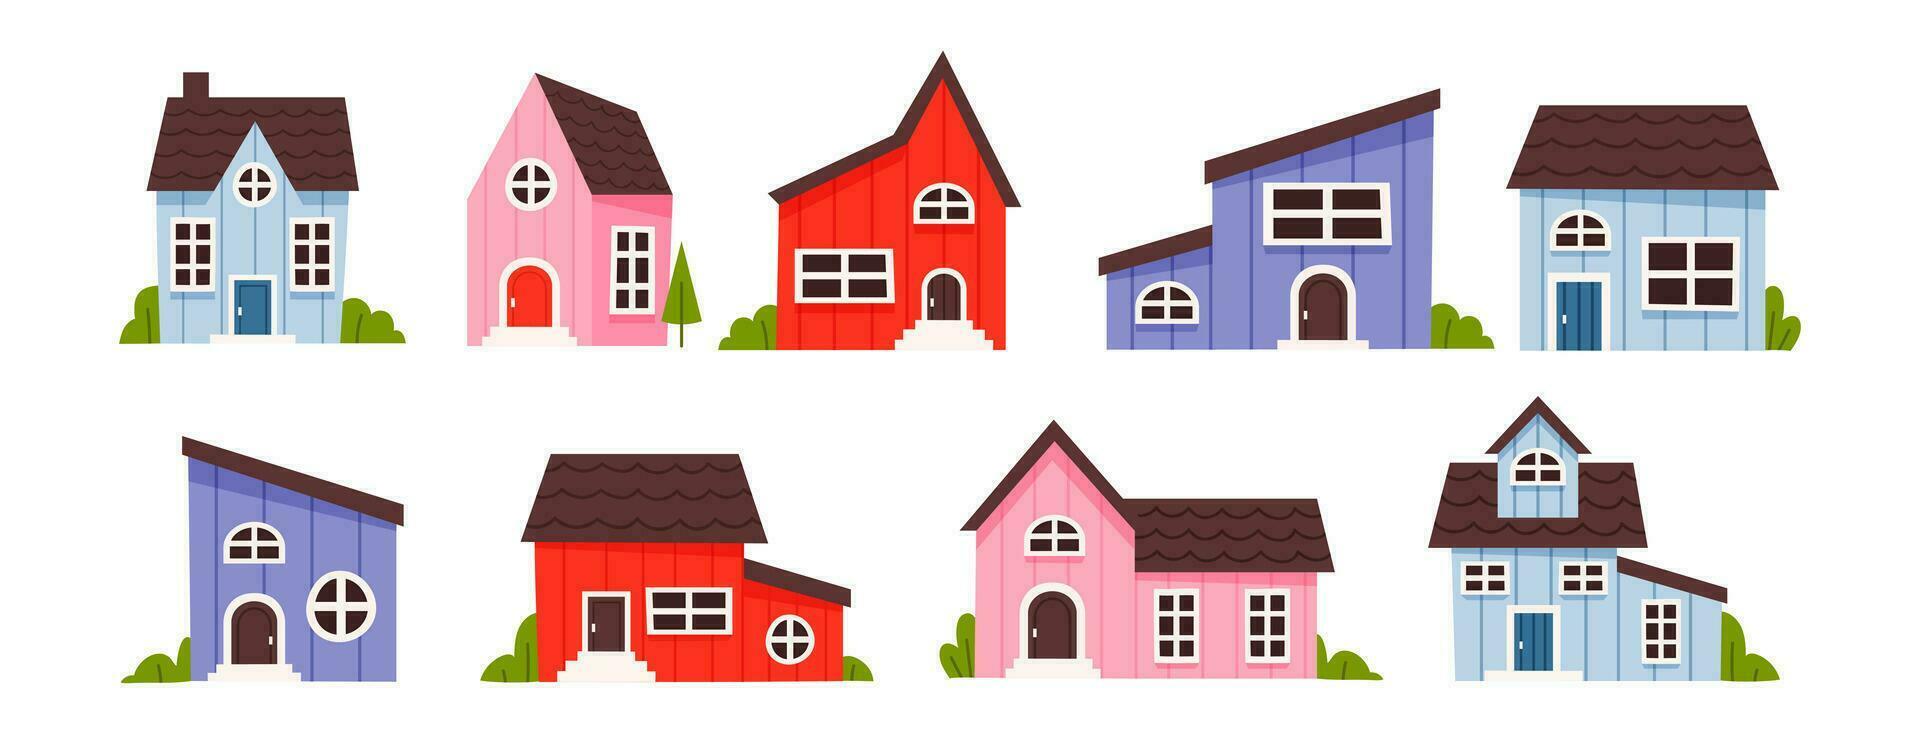 Set of cute different houses vector